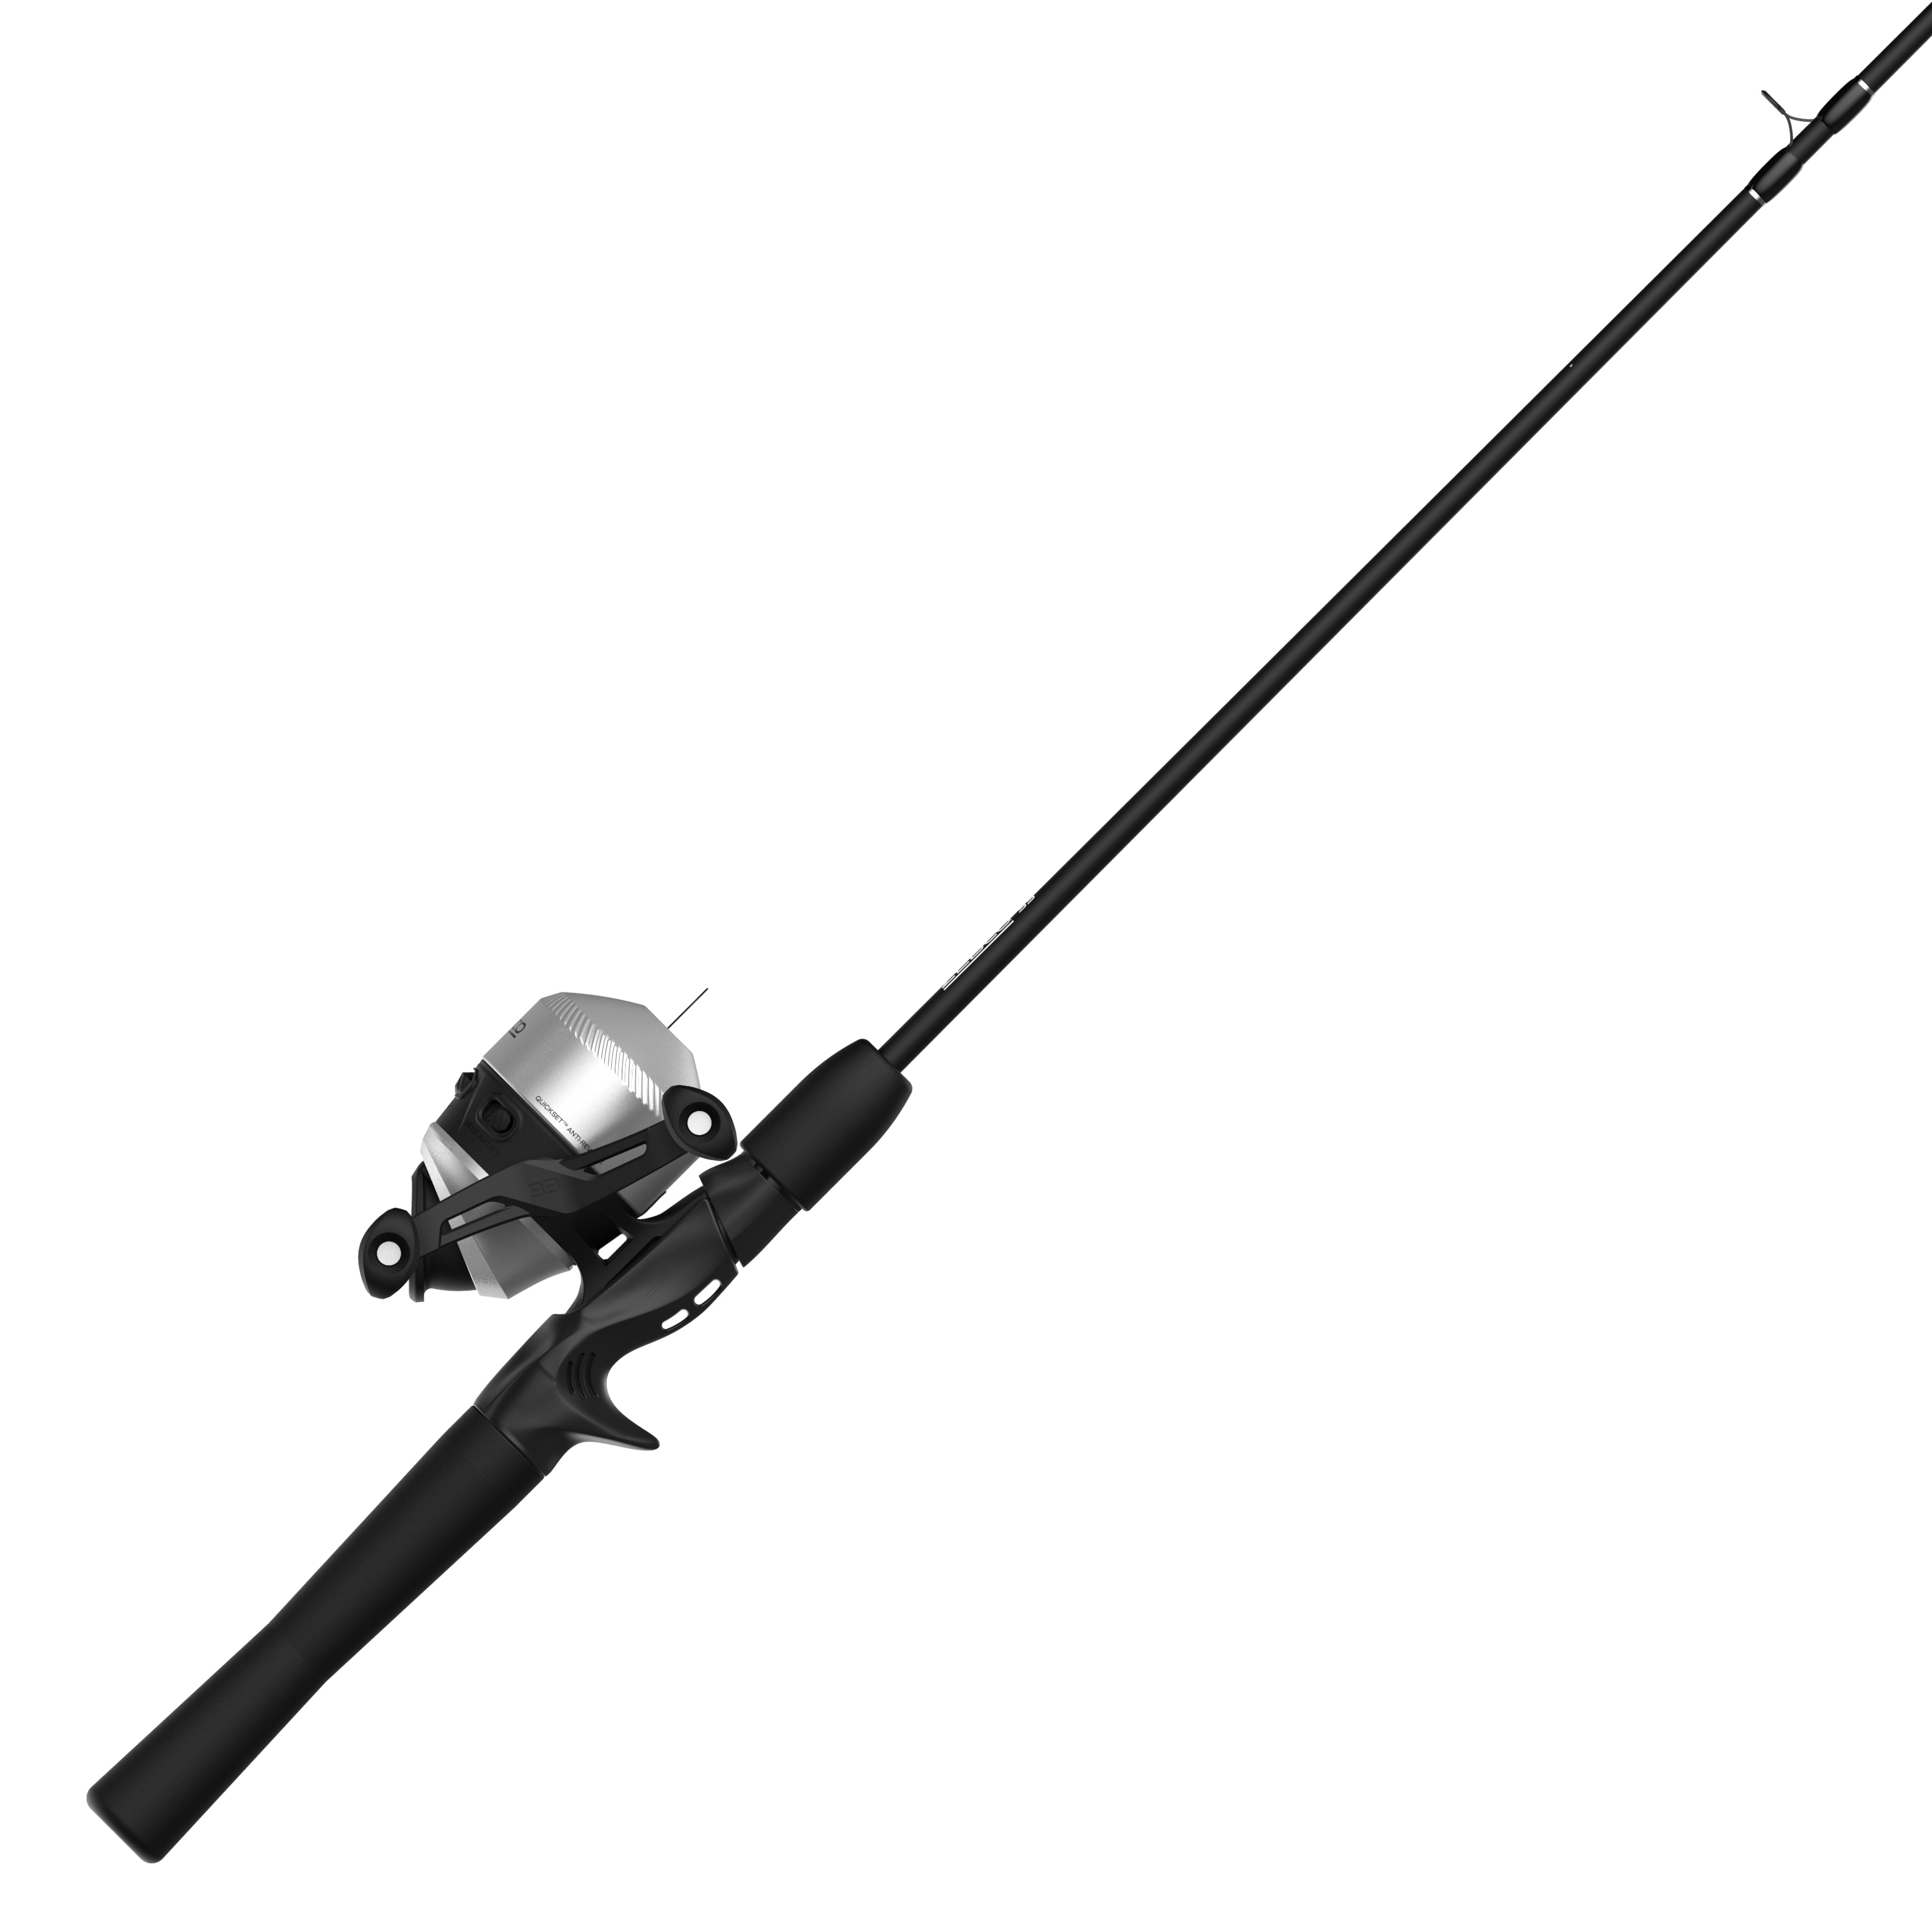  Zebco 33 Micro Spincast Reel and Fishing Rod Combo, 4